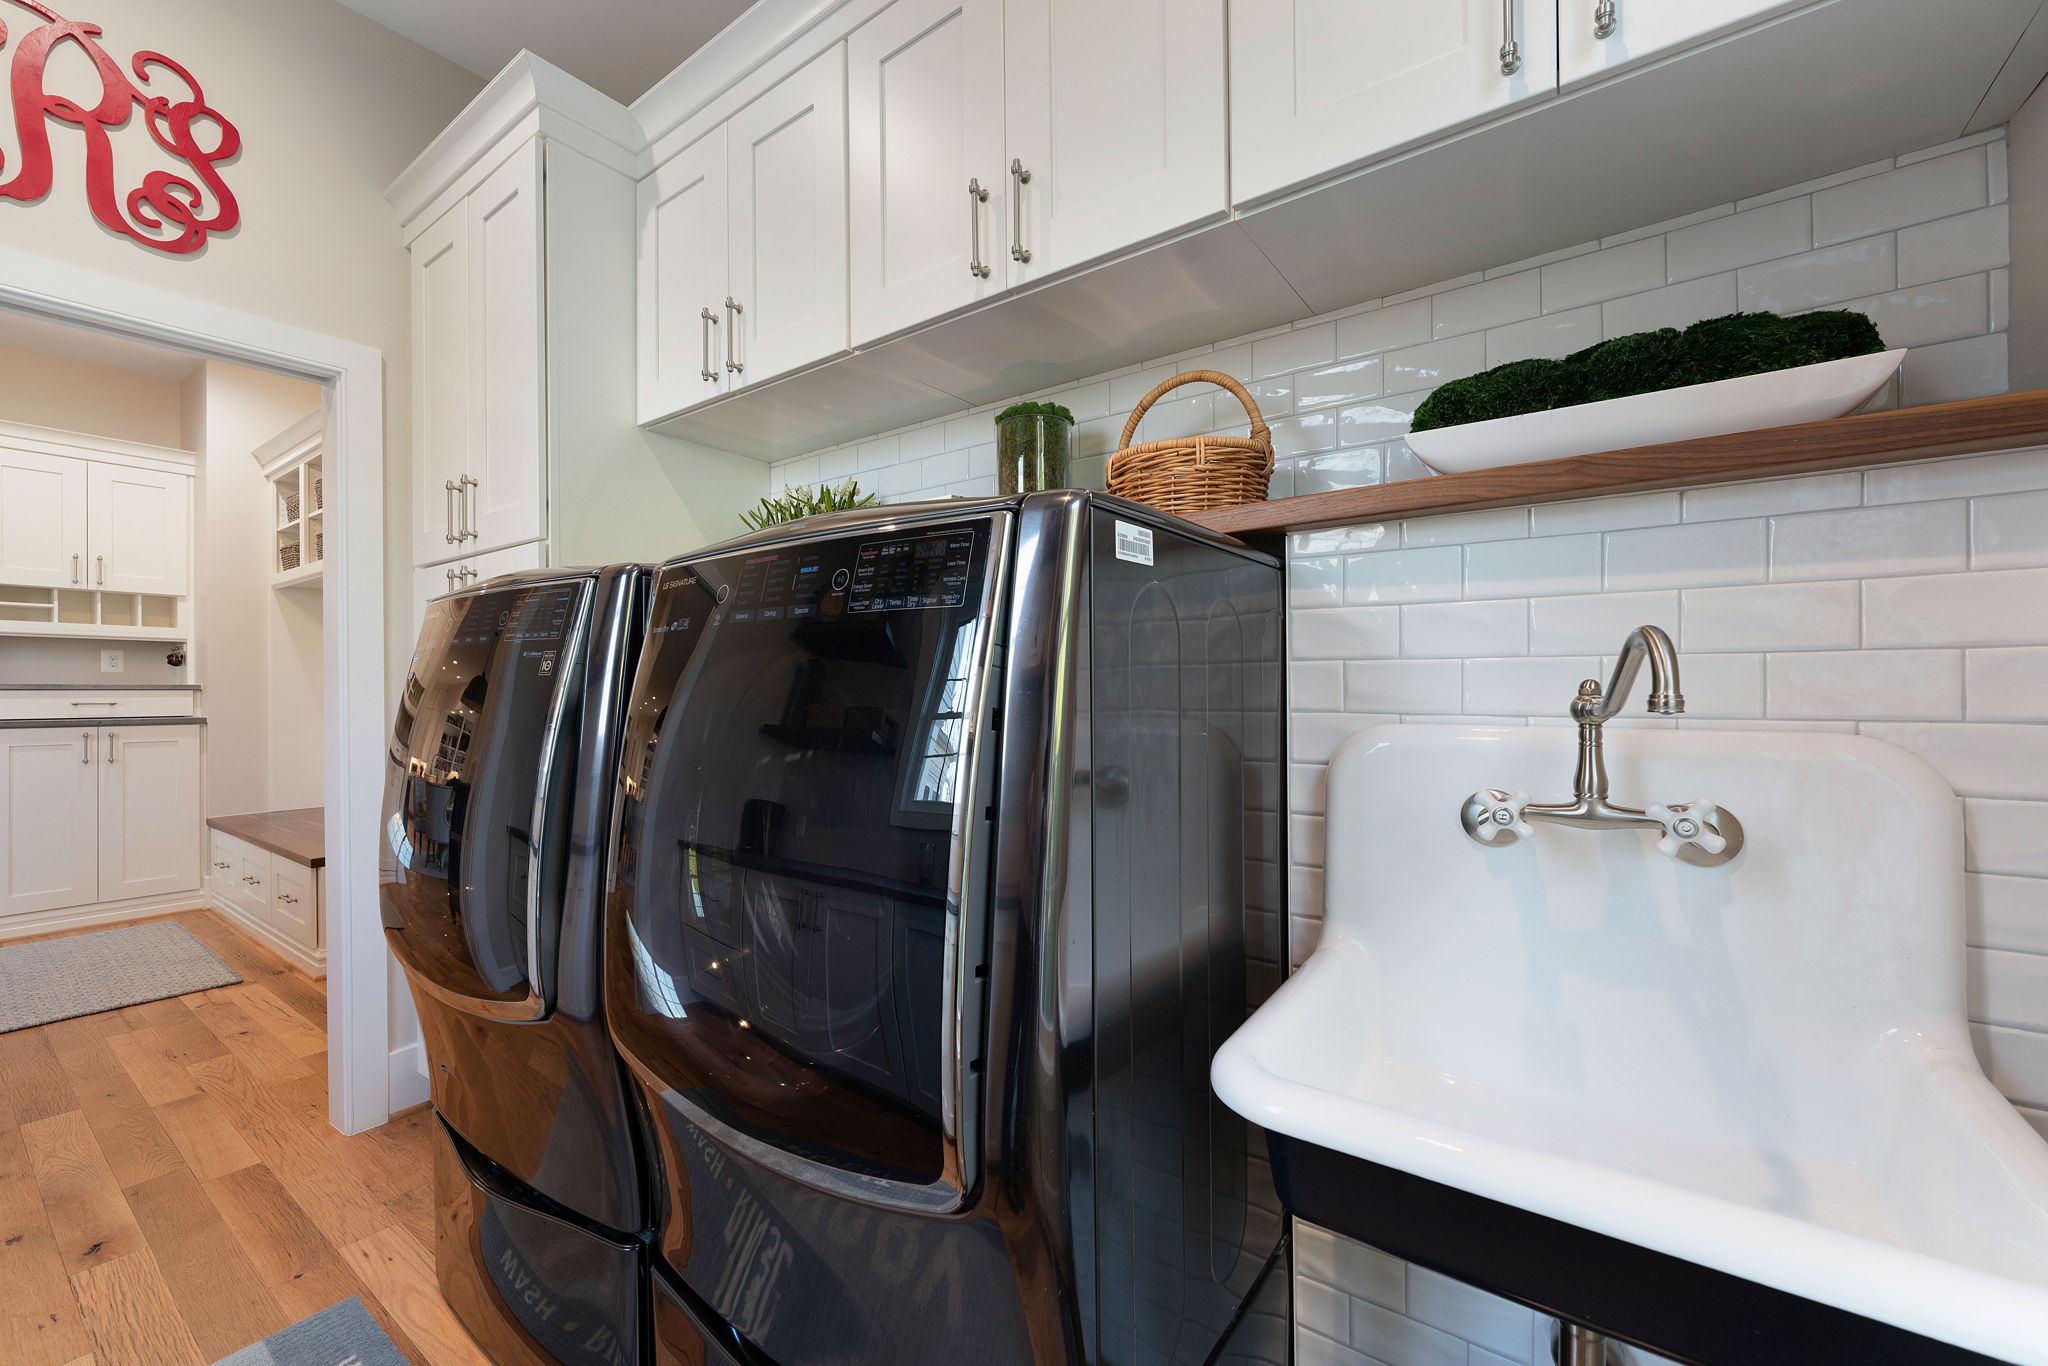 A farm sink blends with an updated laundry center